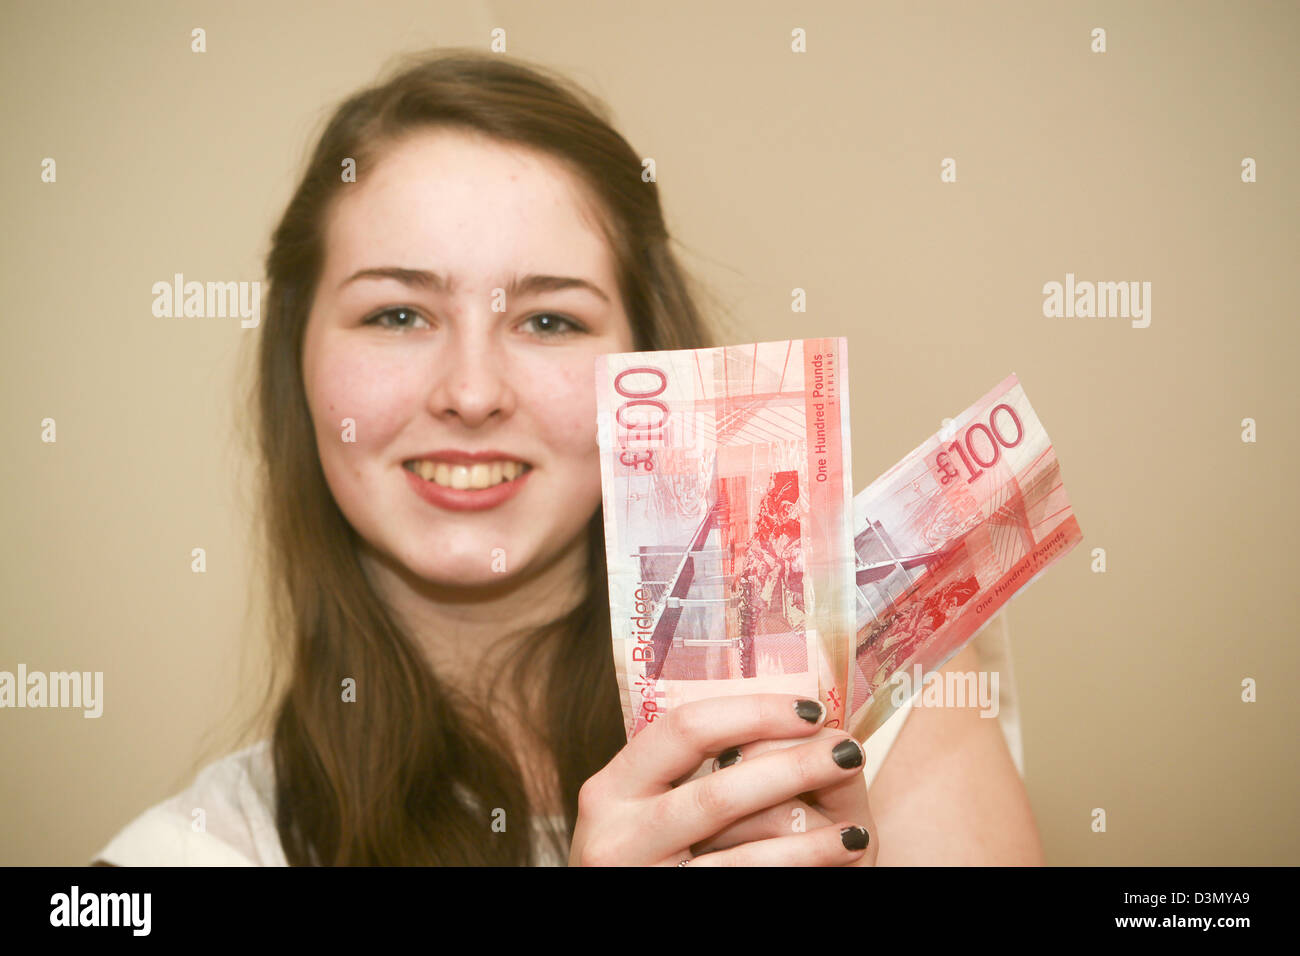 16 year old girl holding two £100 notes Stock Photo